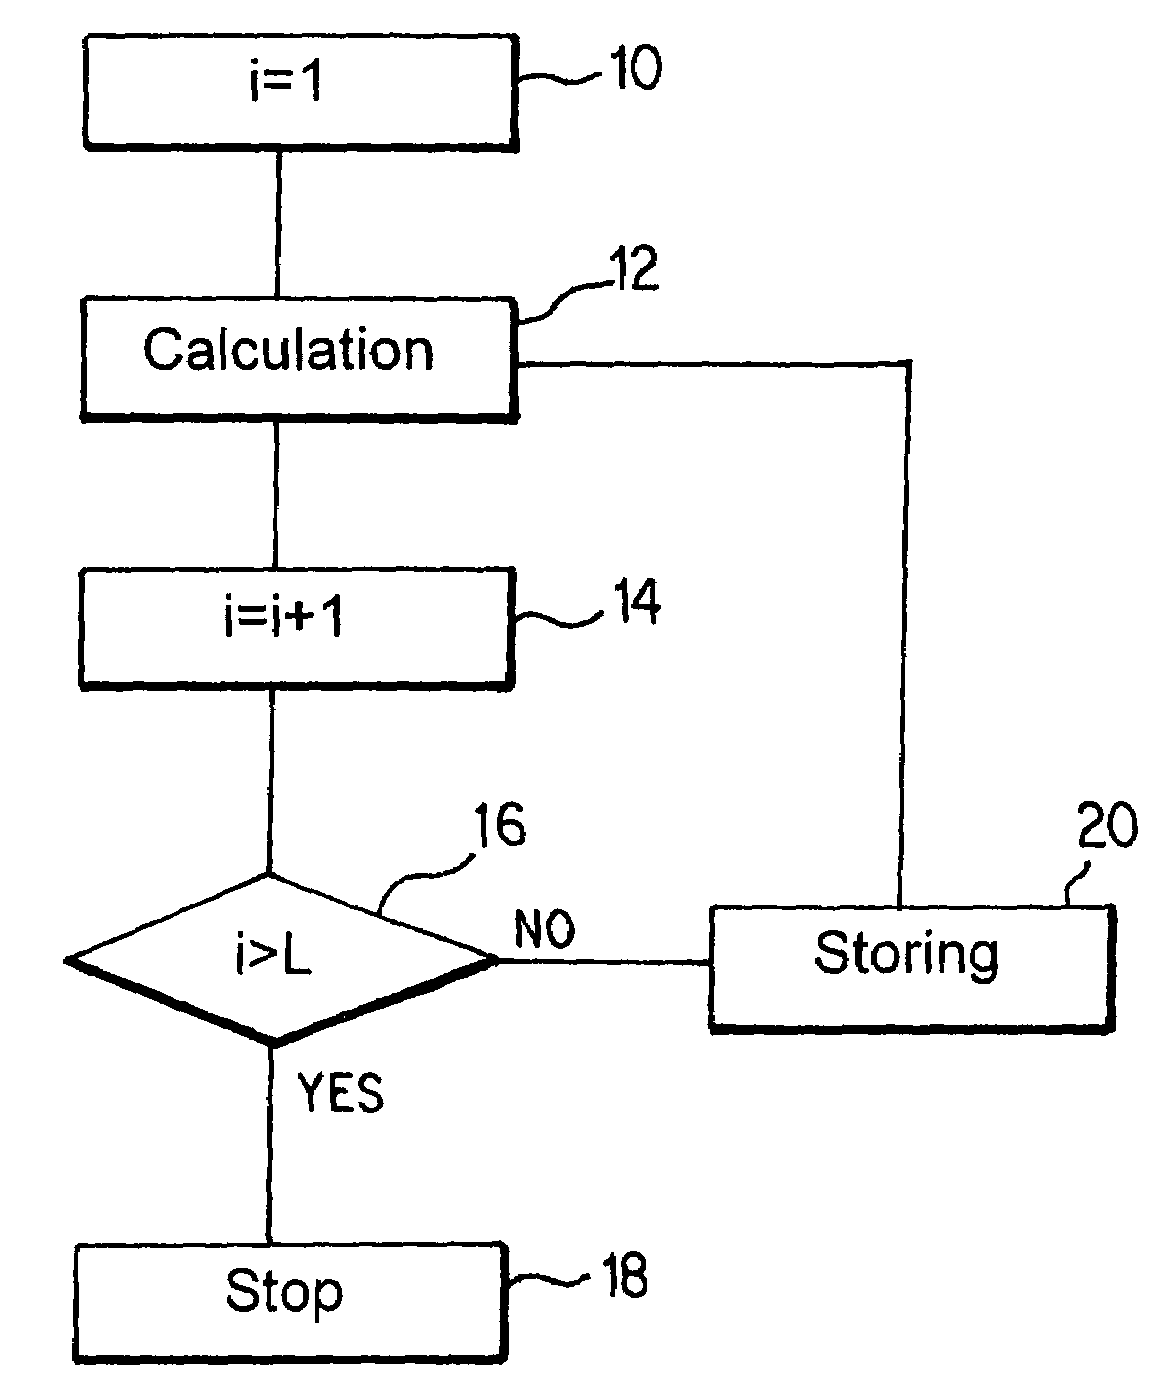 Procedure for computing the Cholesky decomposition in a parallel multiprocessor system